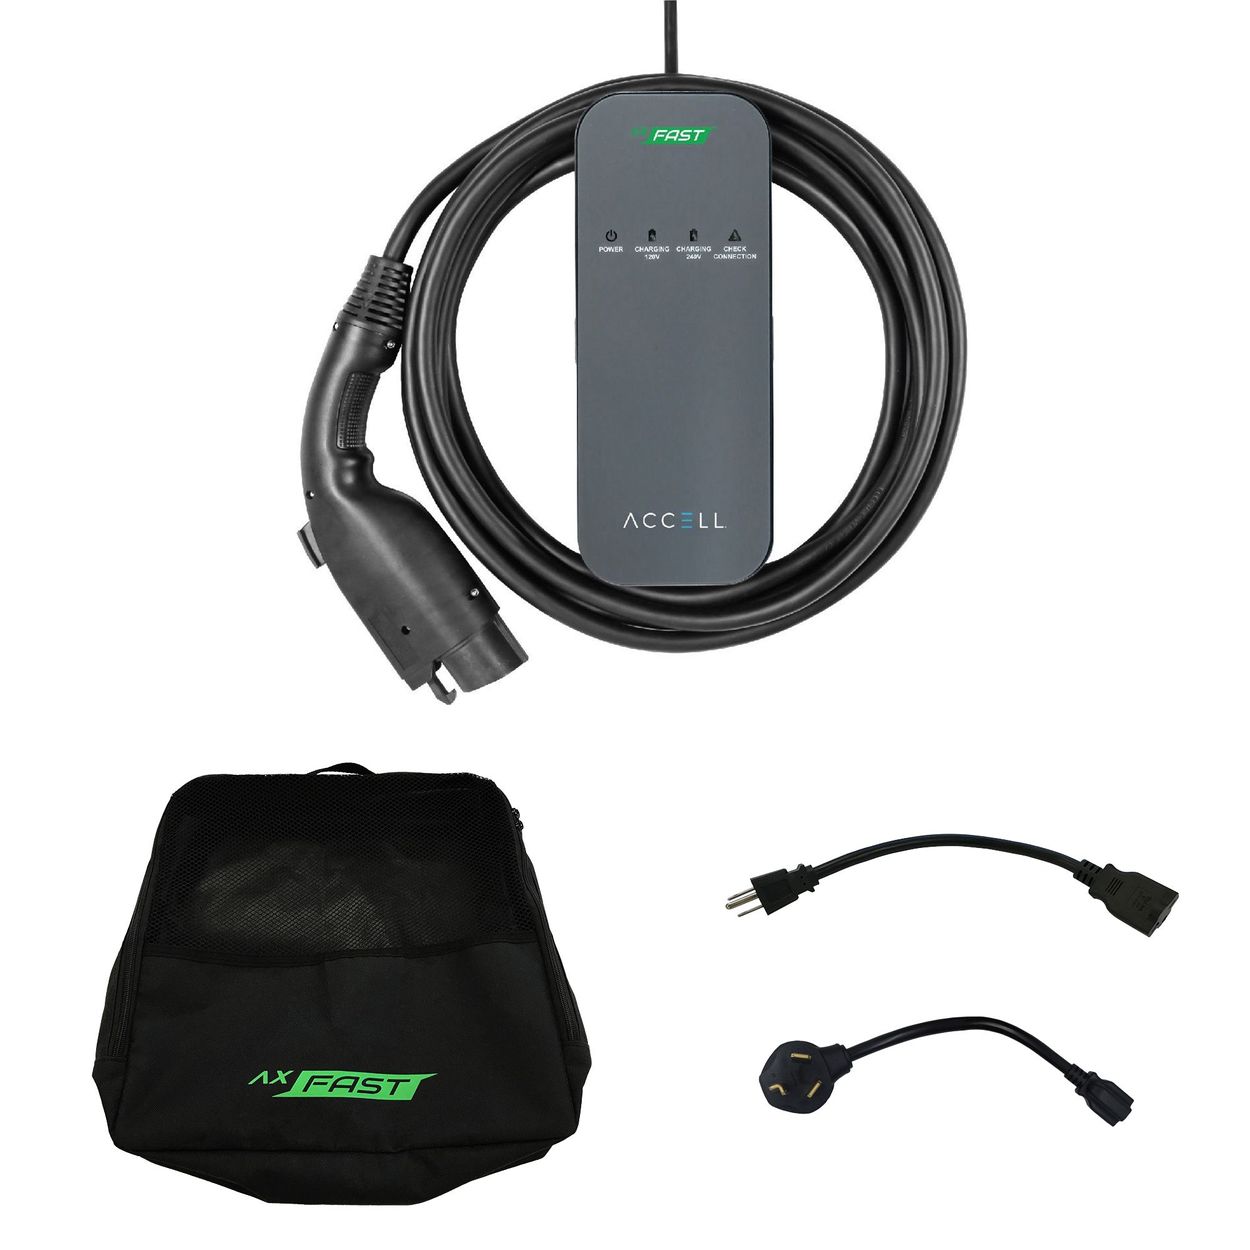 AxFAST Level 2 Portable Electric Vehicle Charger, Charging Up to 3x